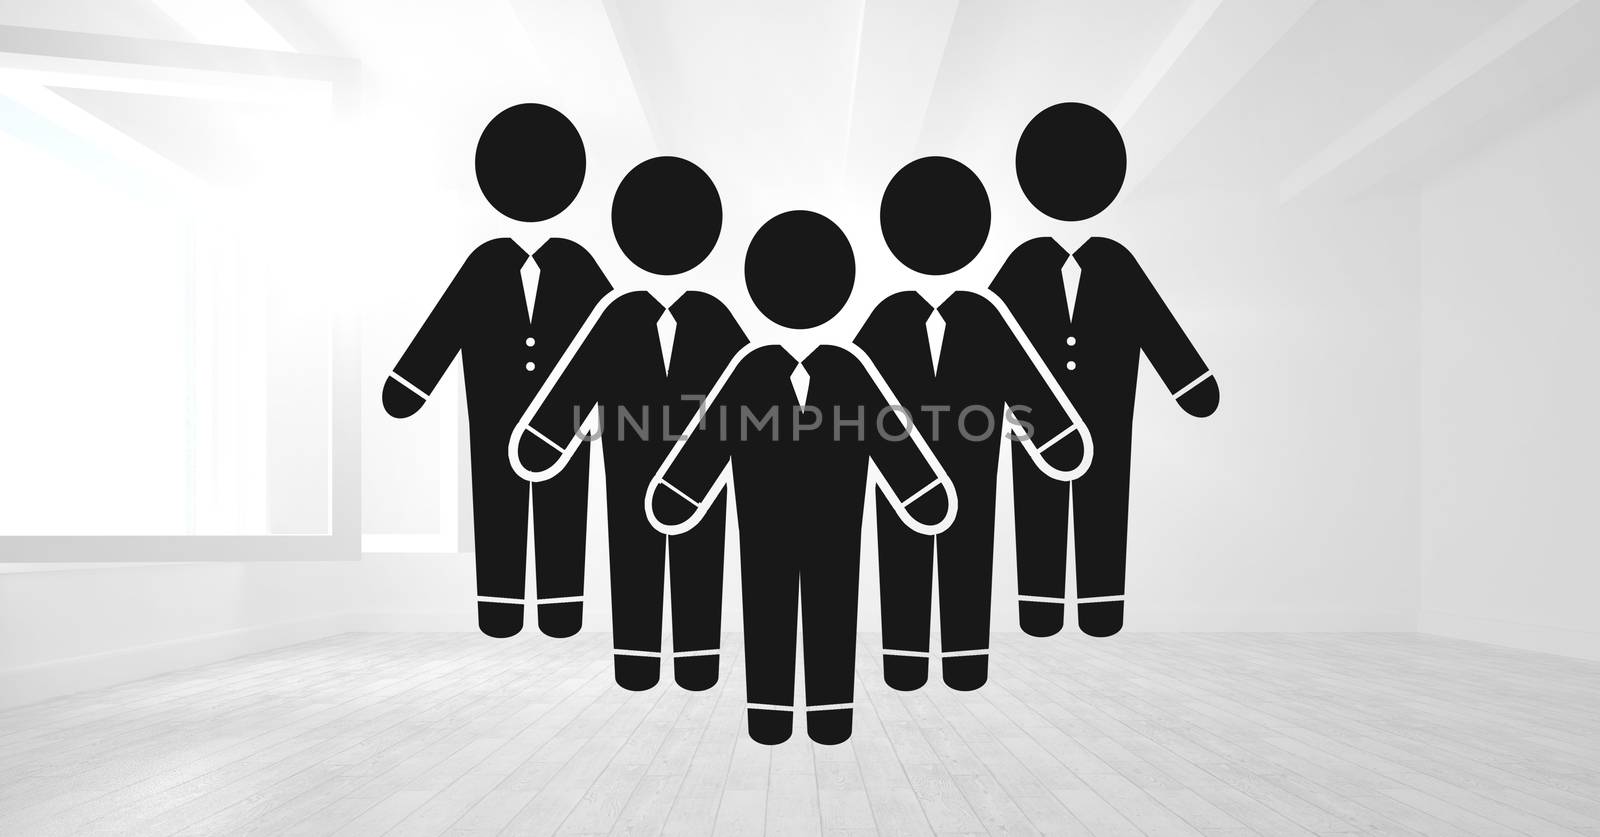 Digital composite of business people group icon